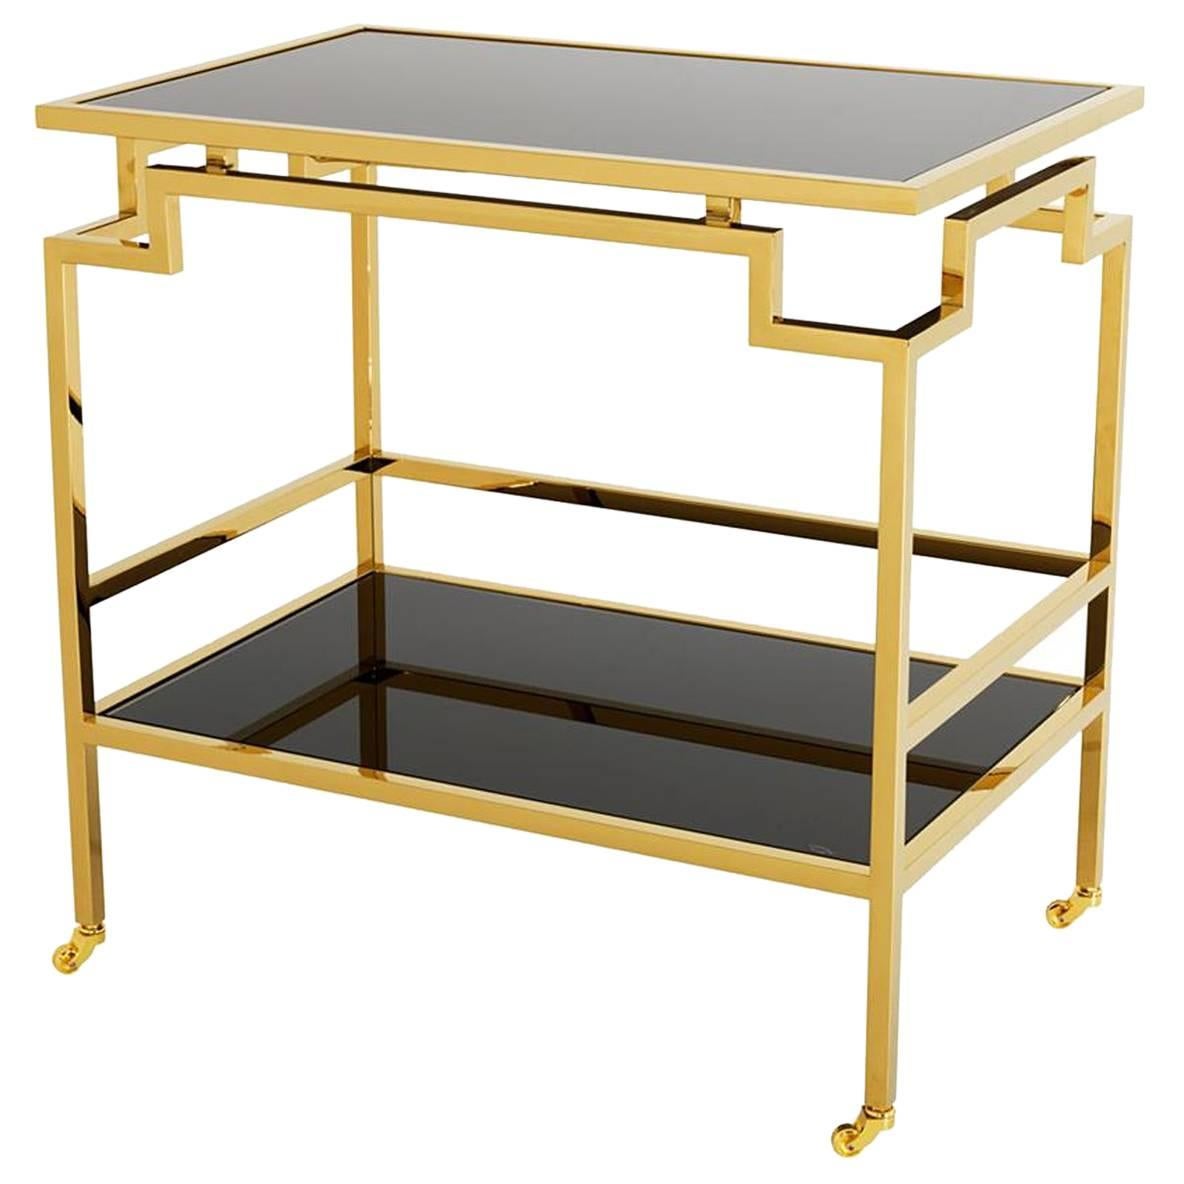 Angles Trolley in Gold Finish or in Polished Stainless Steel